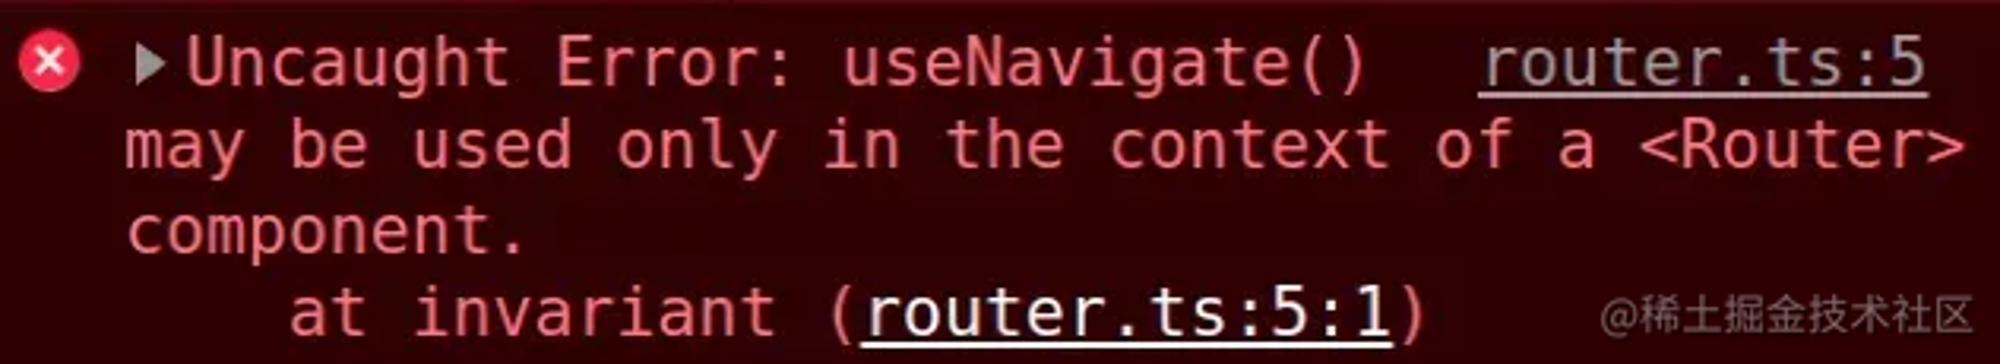 usenavigate-may-be-used-only-in-the-context-of-router.png